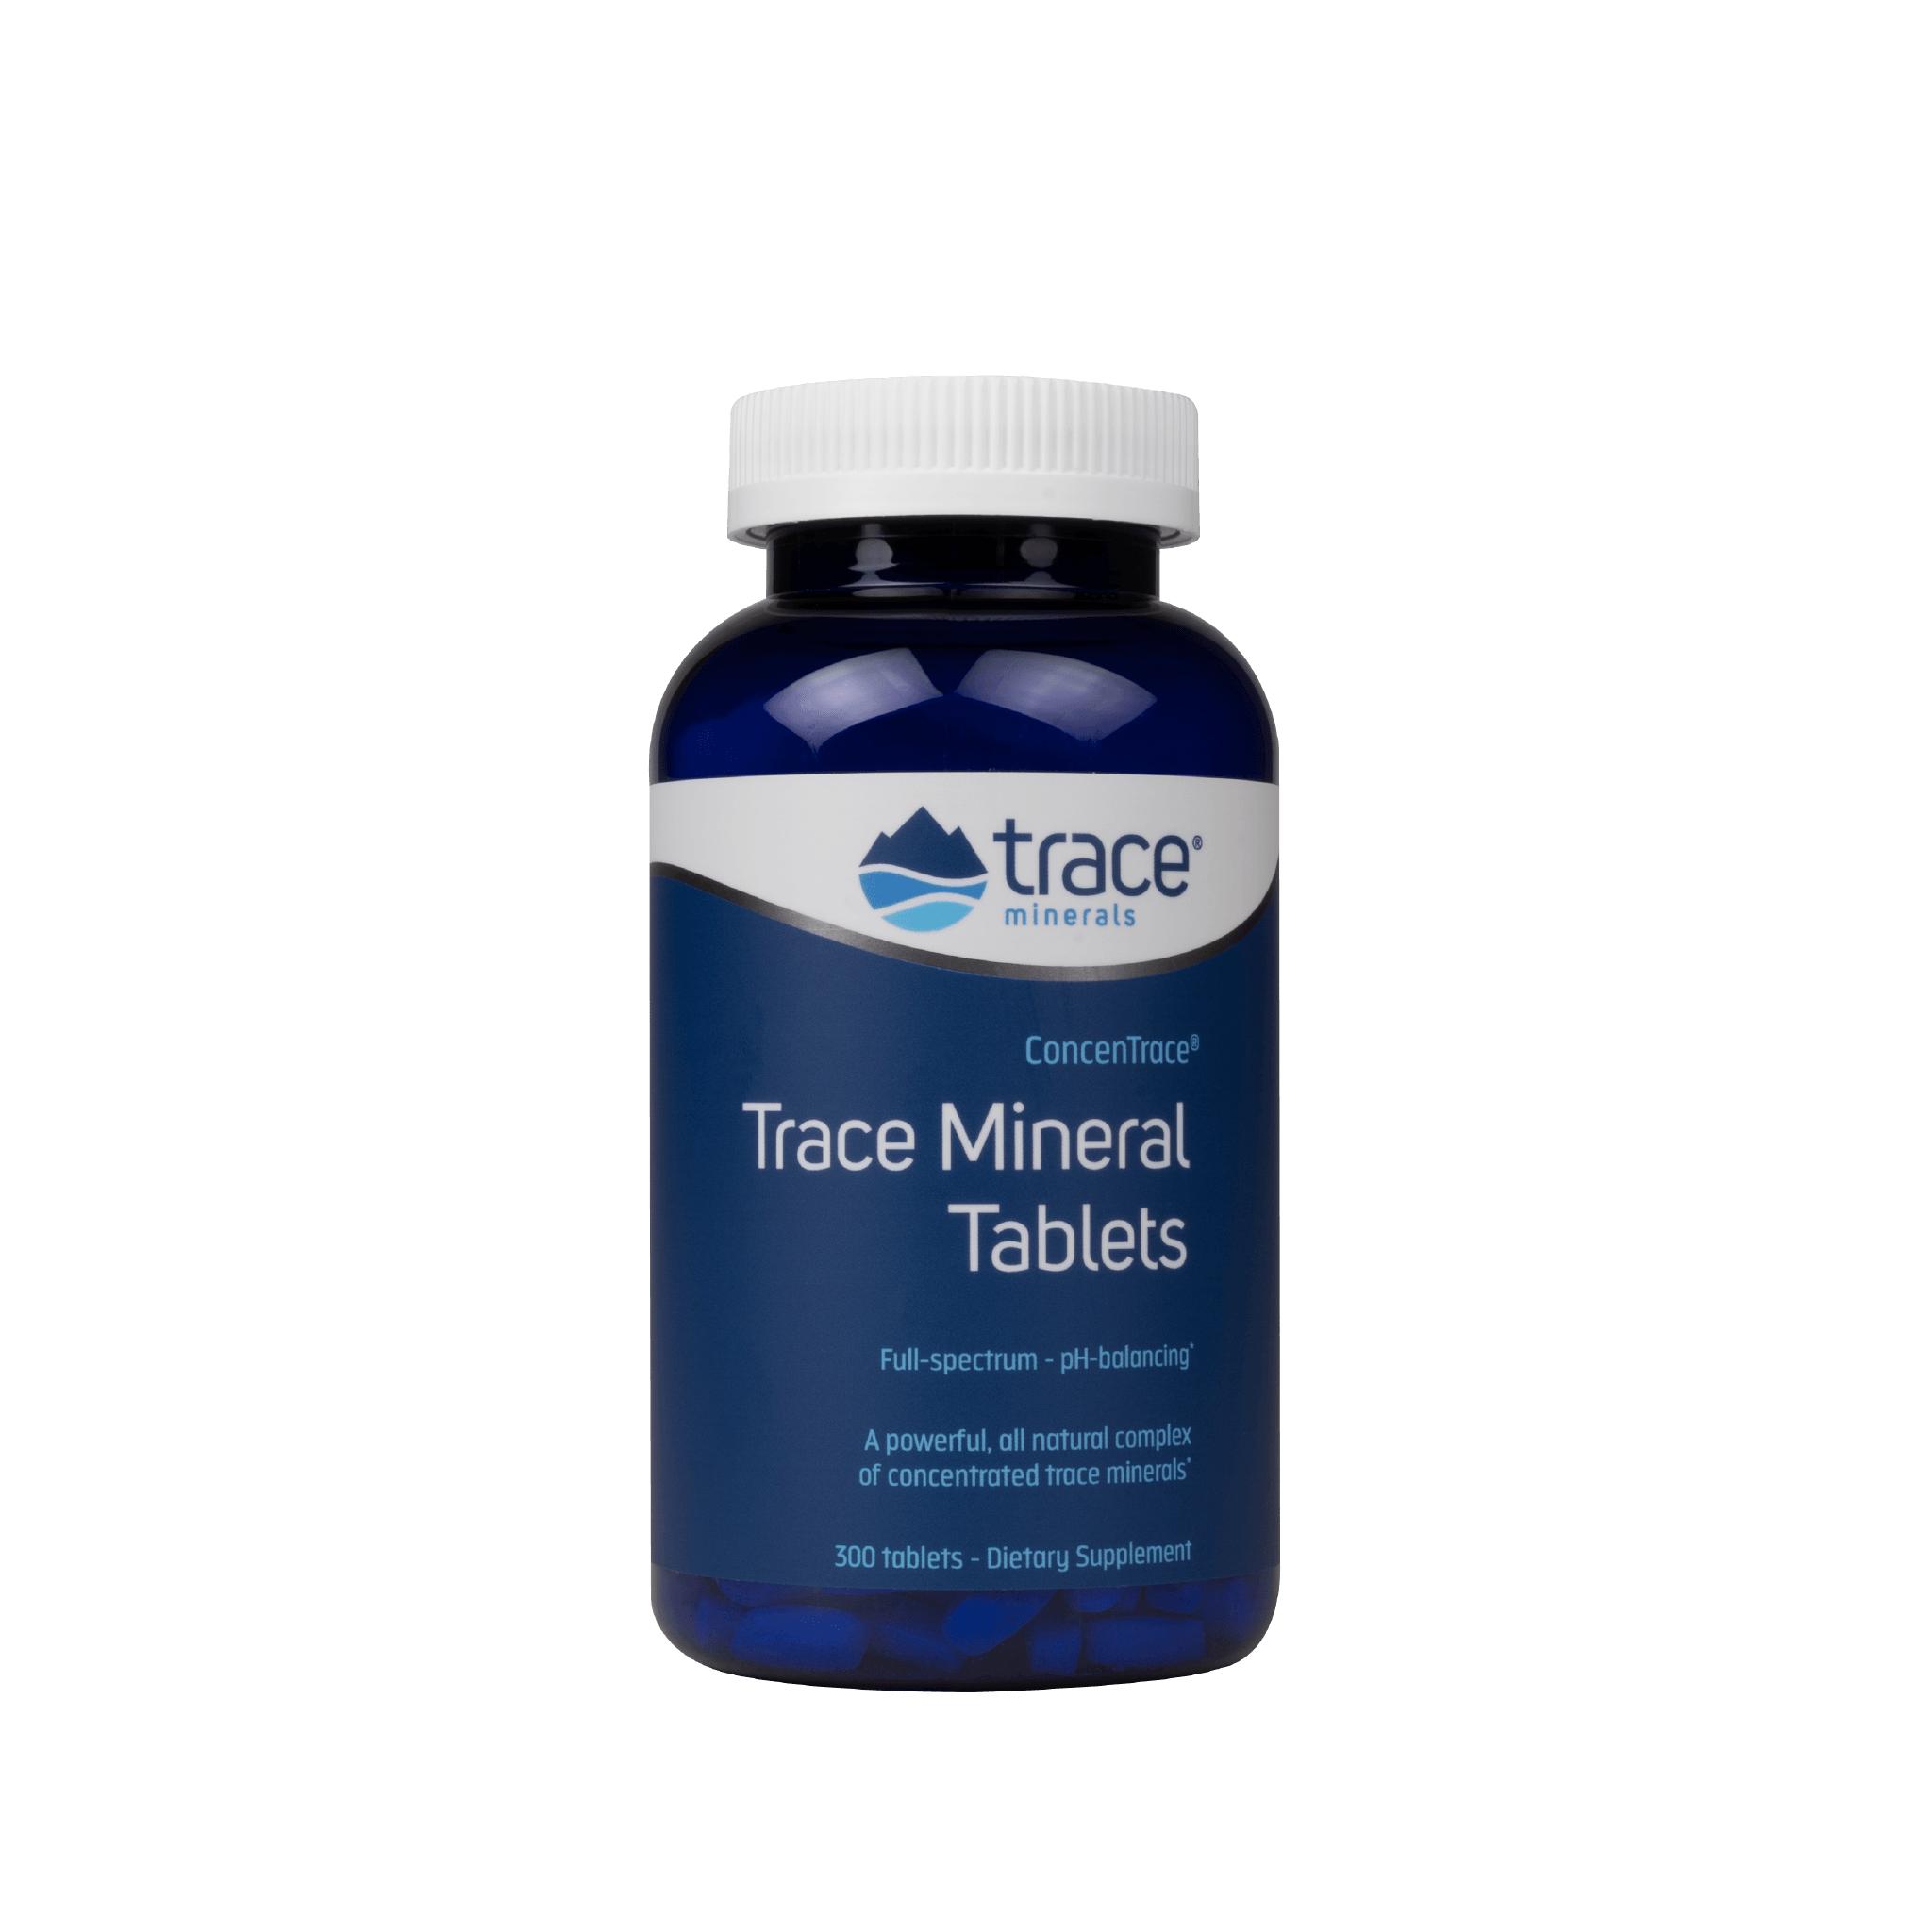 ConcenTrace Trace Mineral Tablets - Trace Minerals